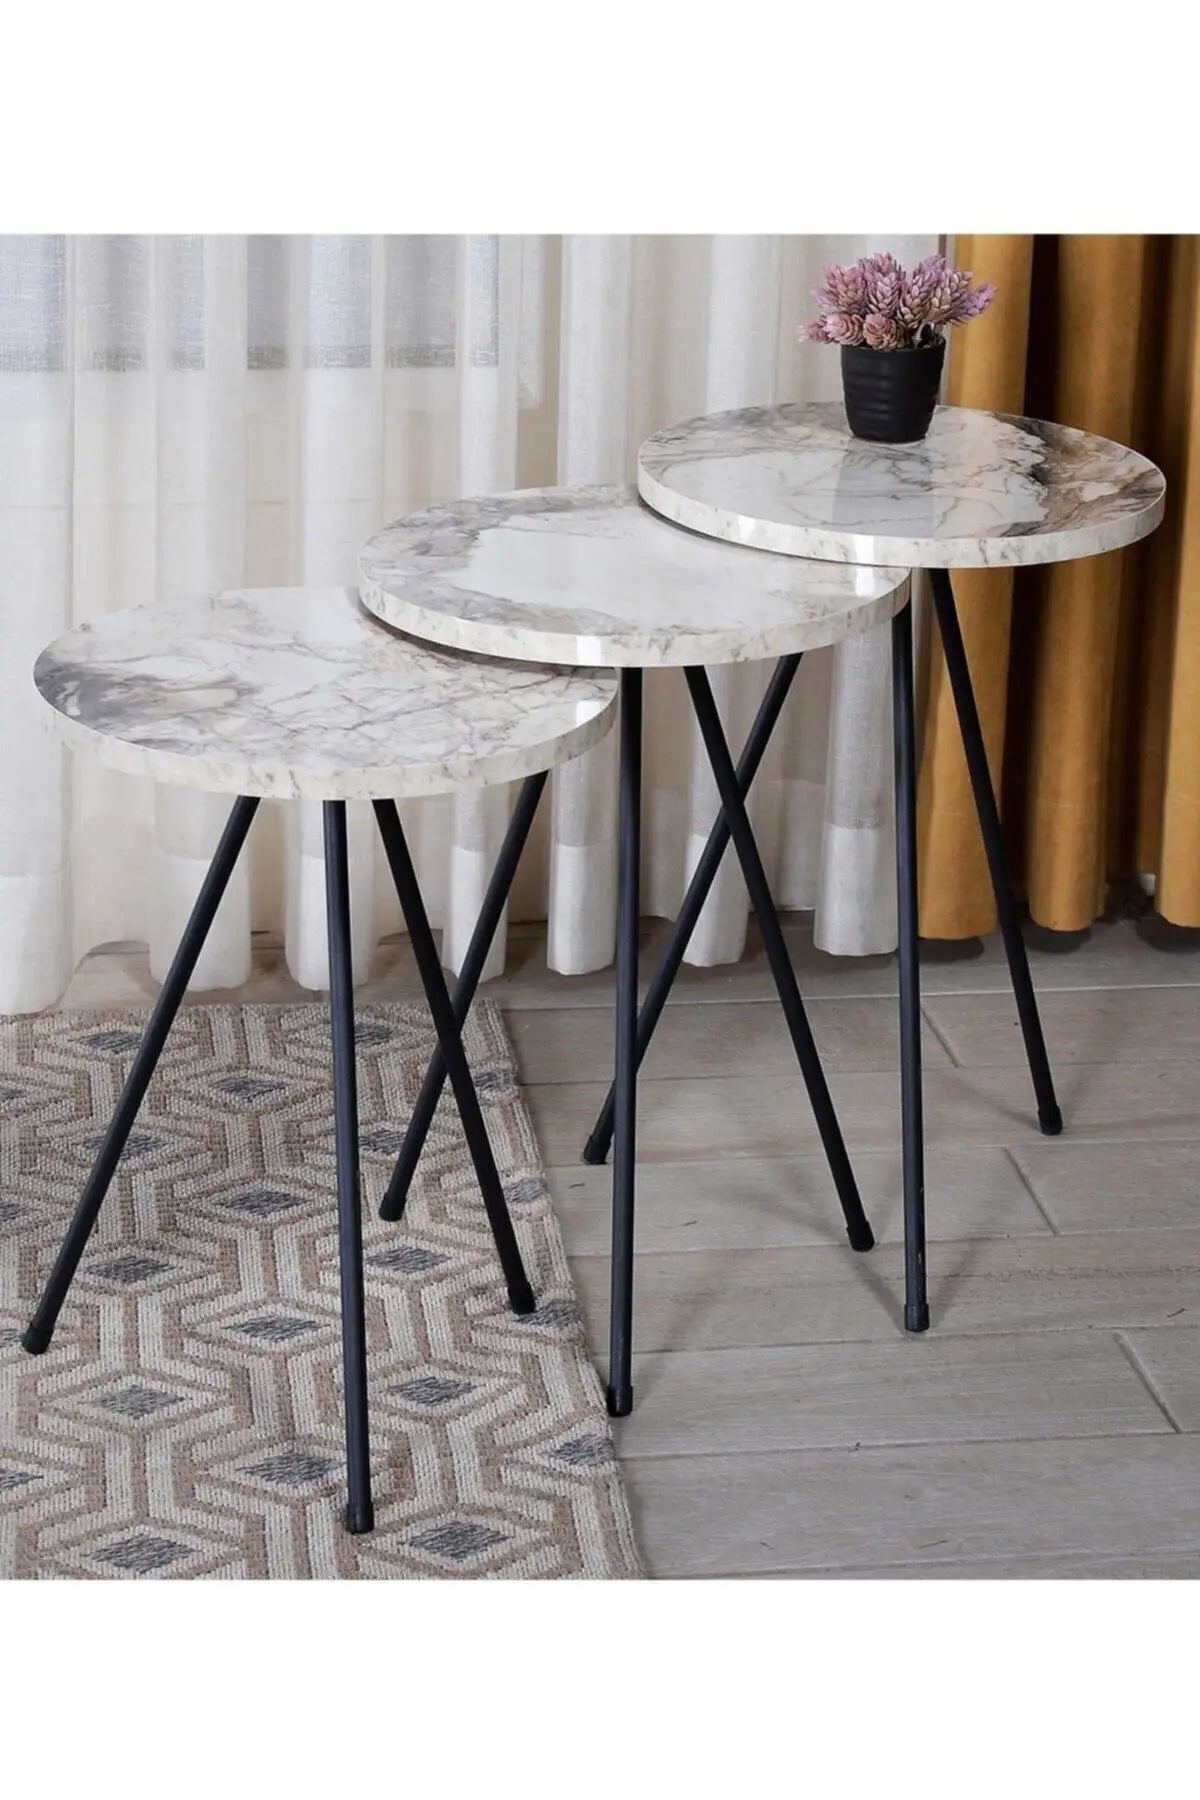 Nesting Tables Set of 3 Marble Wooden with Black Metal Legs